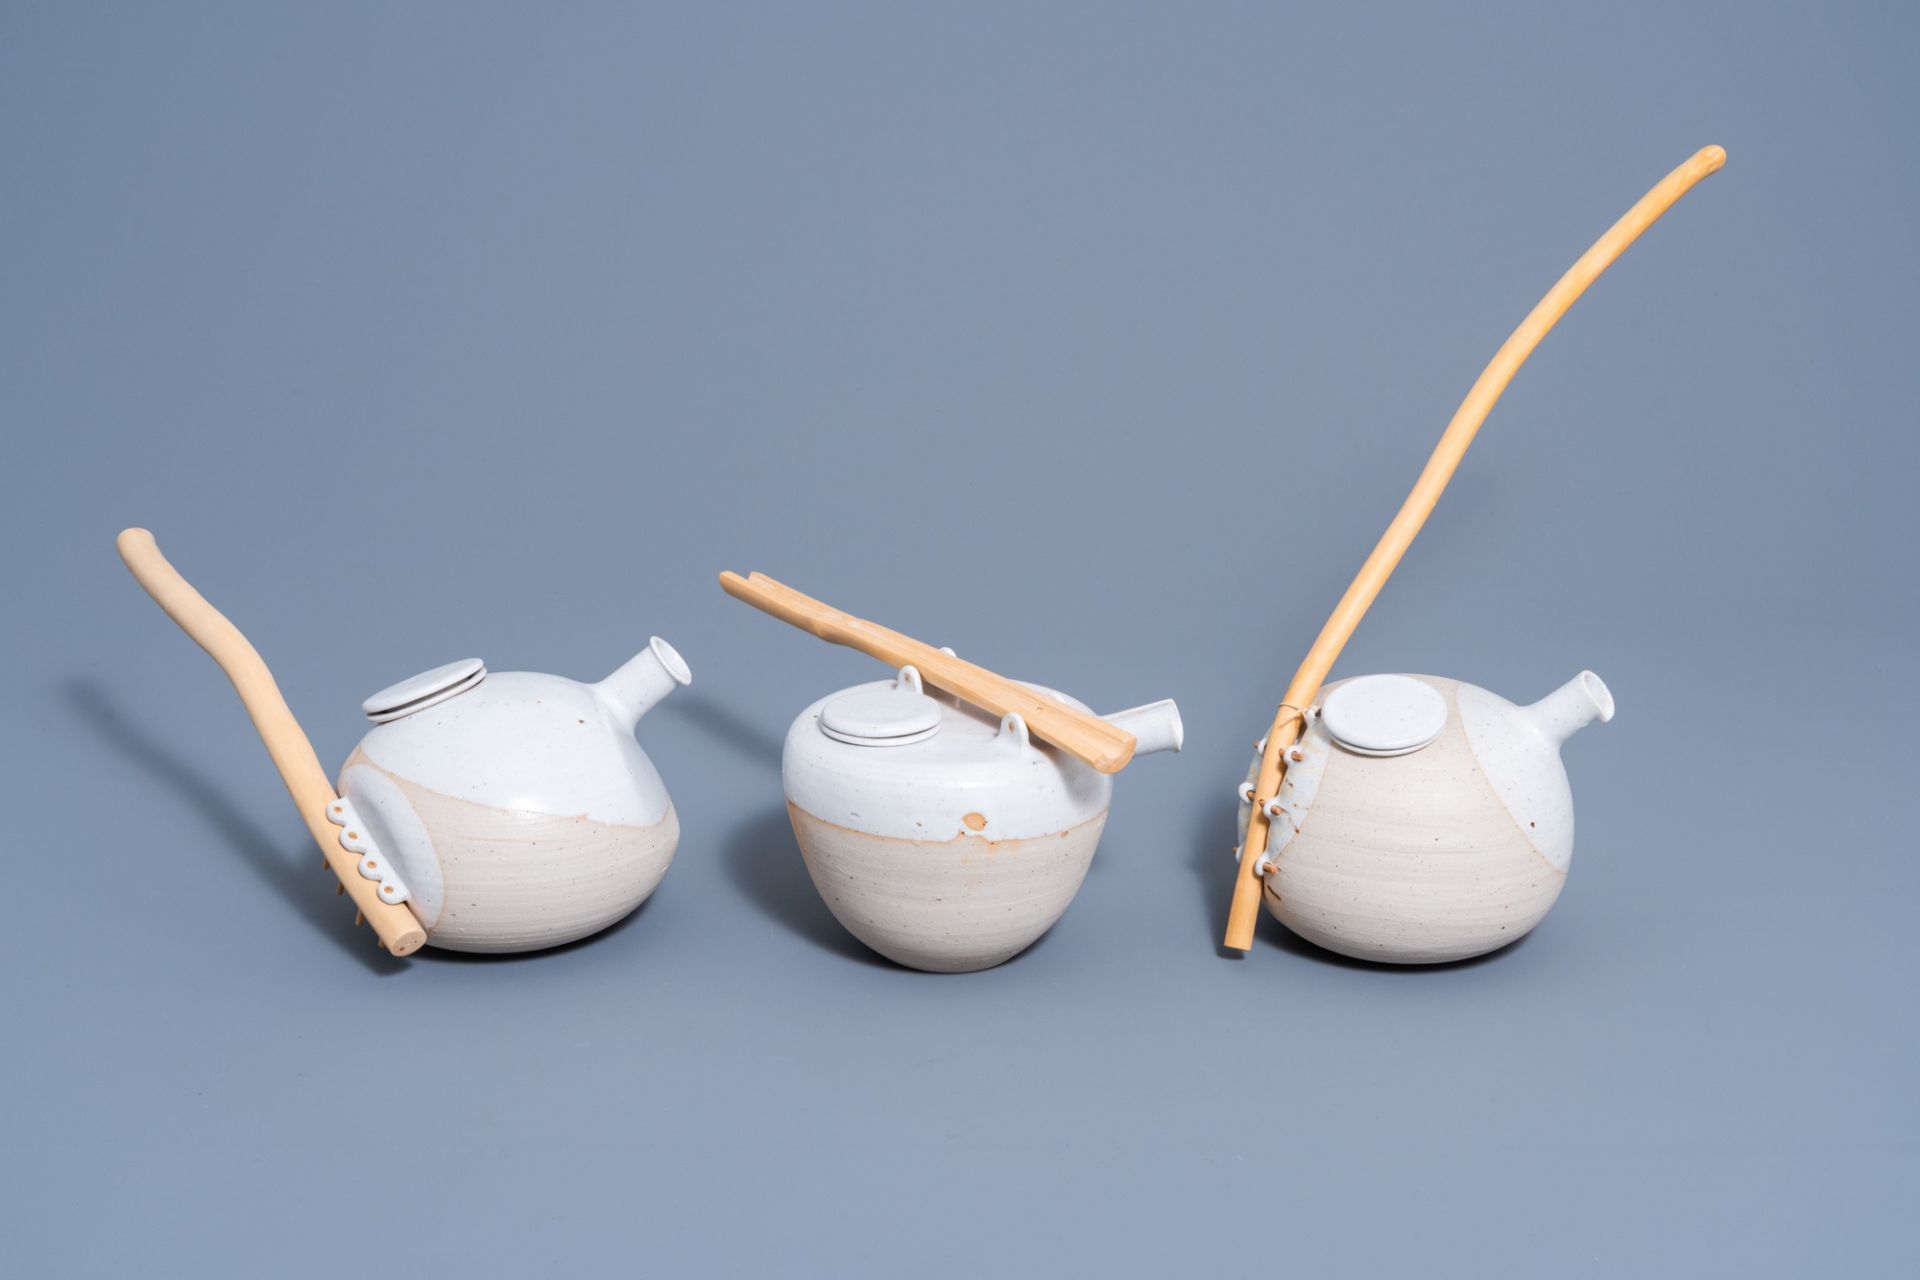 Frits Vandenbussche (1942): Three partly glazed stoneware teapots and covers with wood handles, 20th